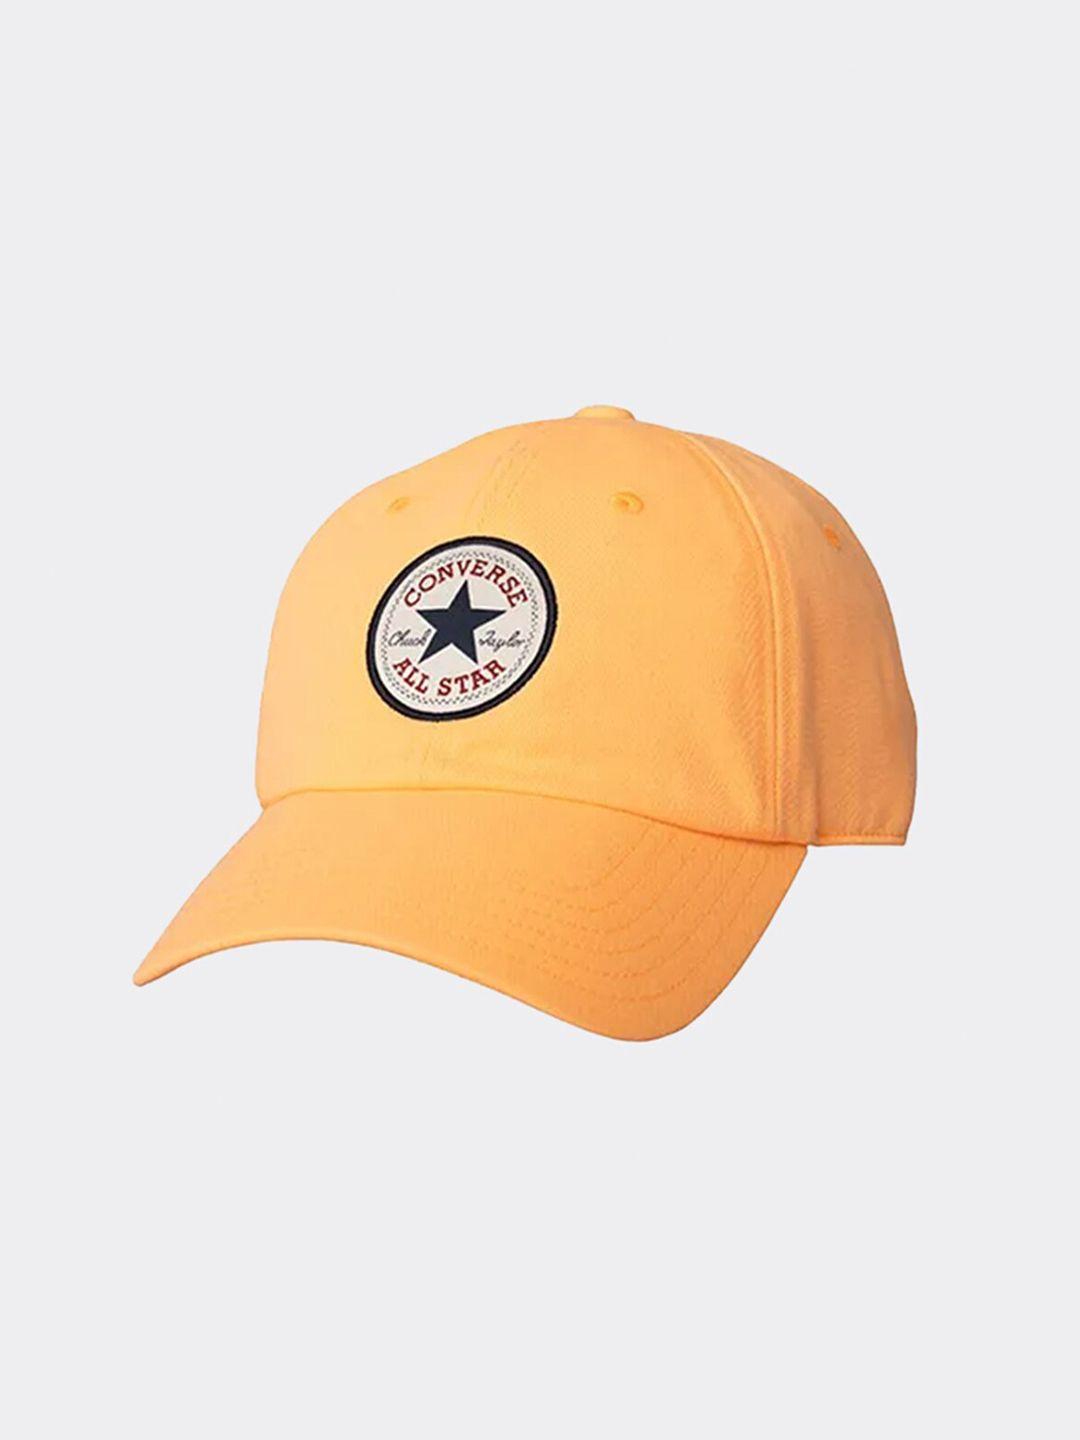 converse unisex embroidered chuck taylor all star patch baseball cap